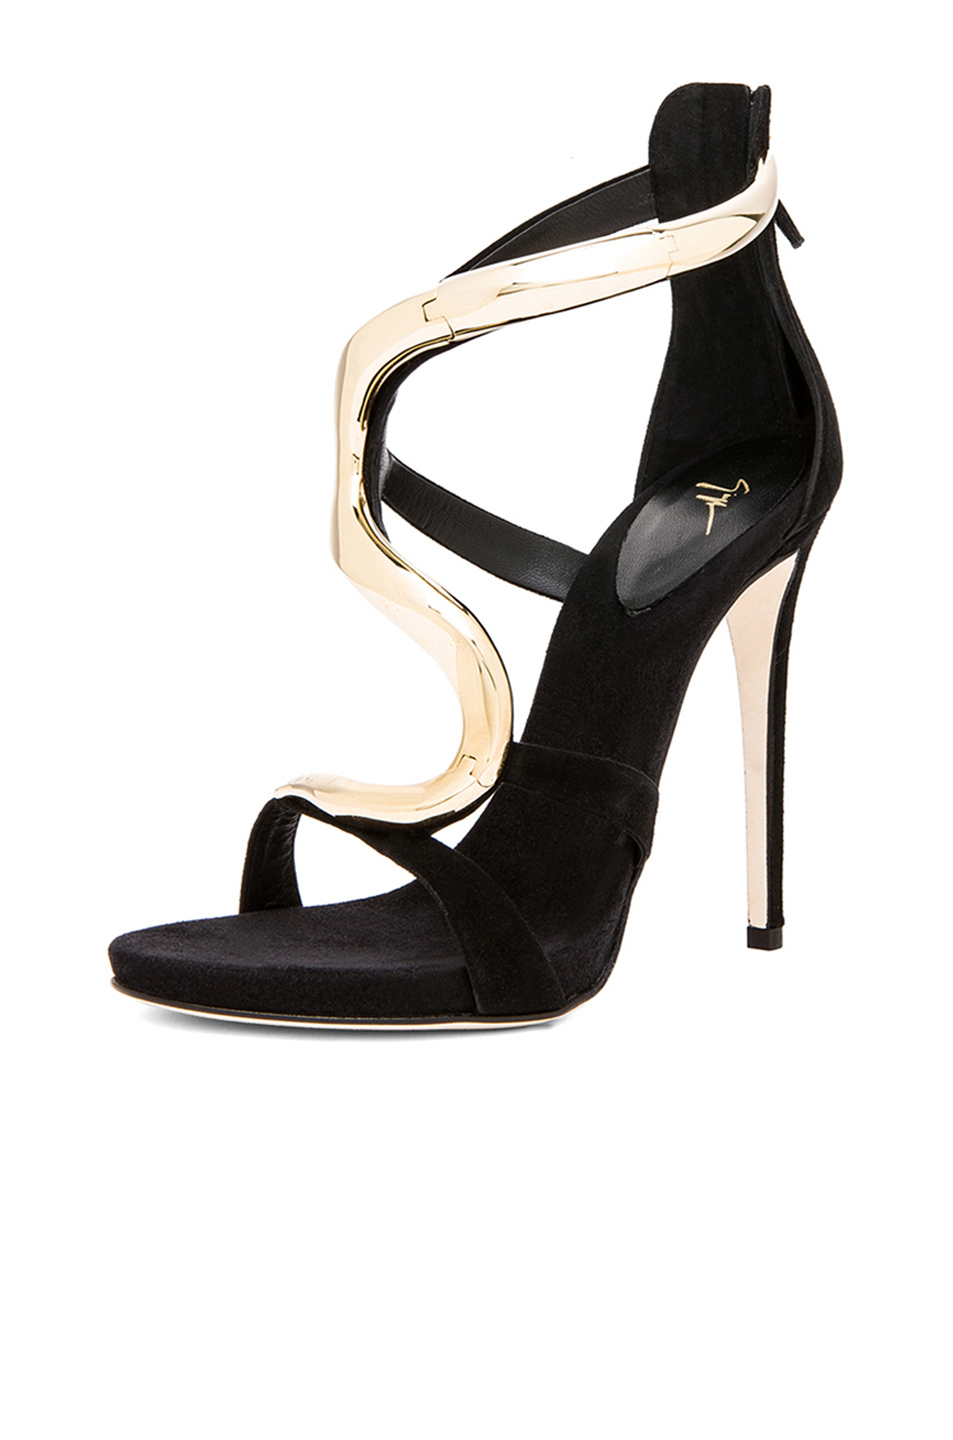 Black Heels Gold Studs | Venice Gold Studded Heels in Black – Style Cheat